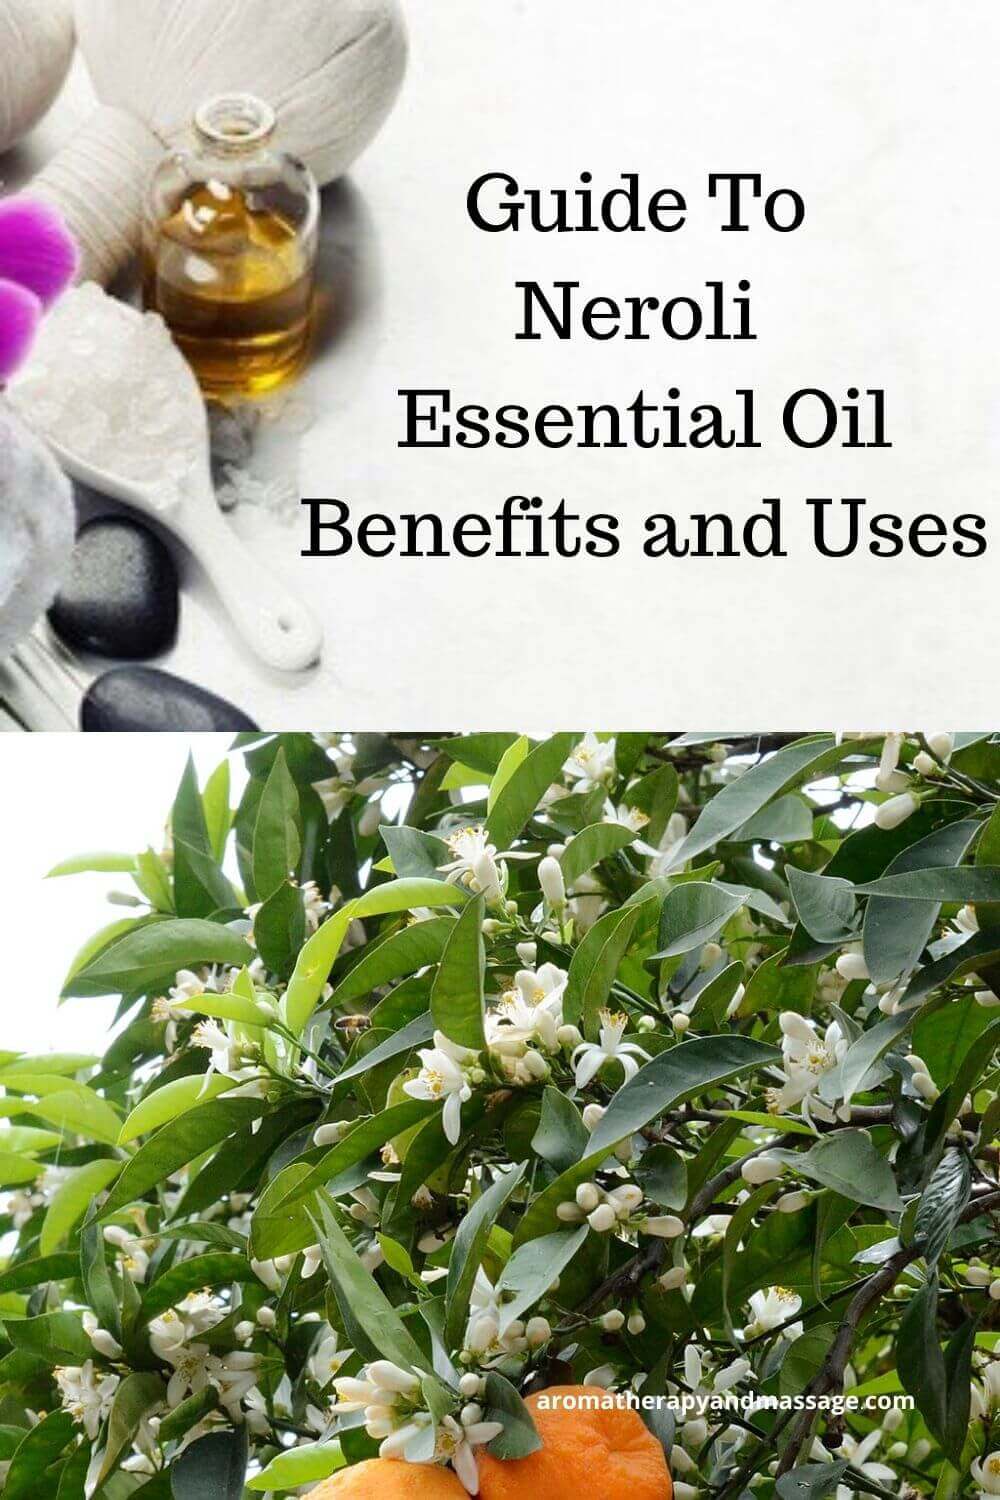 Aromatherapy supplies with the words Guide To Neroli Essential Oil Benefits and Uses and photo of a bitter orange tree.